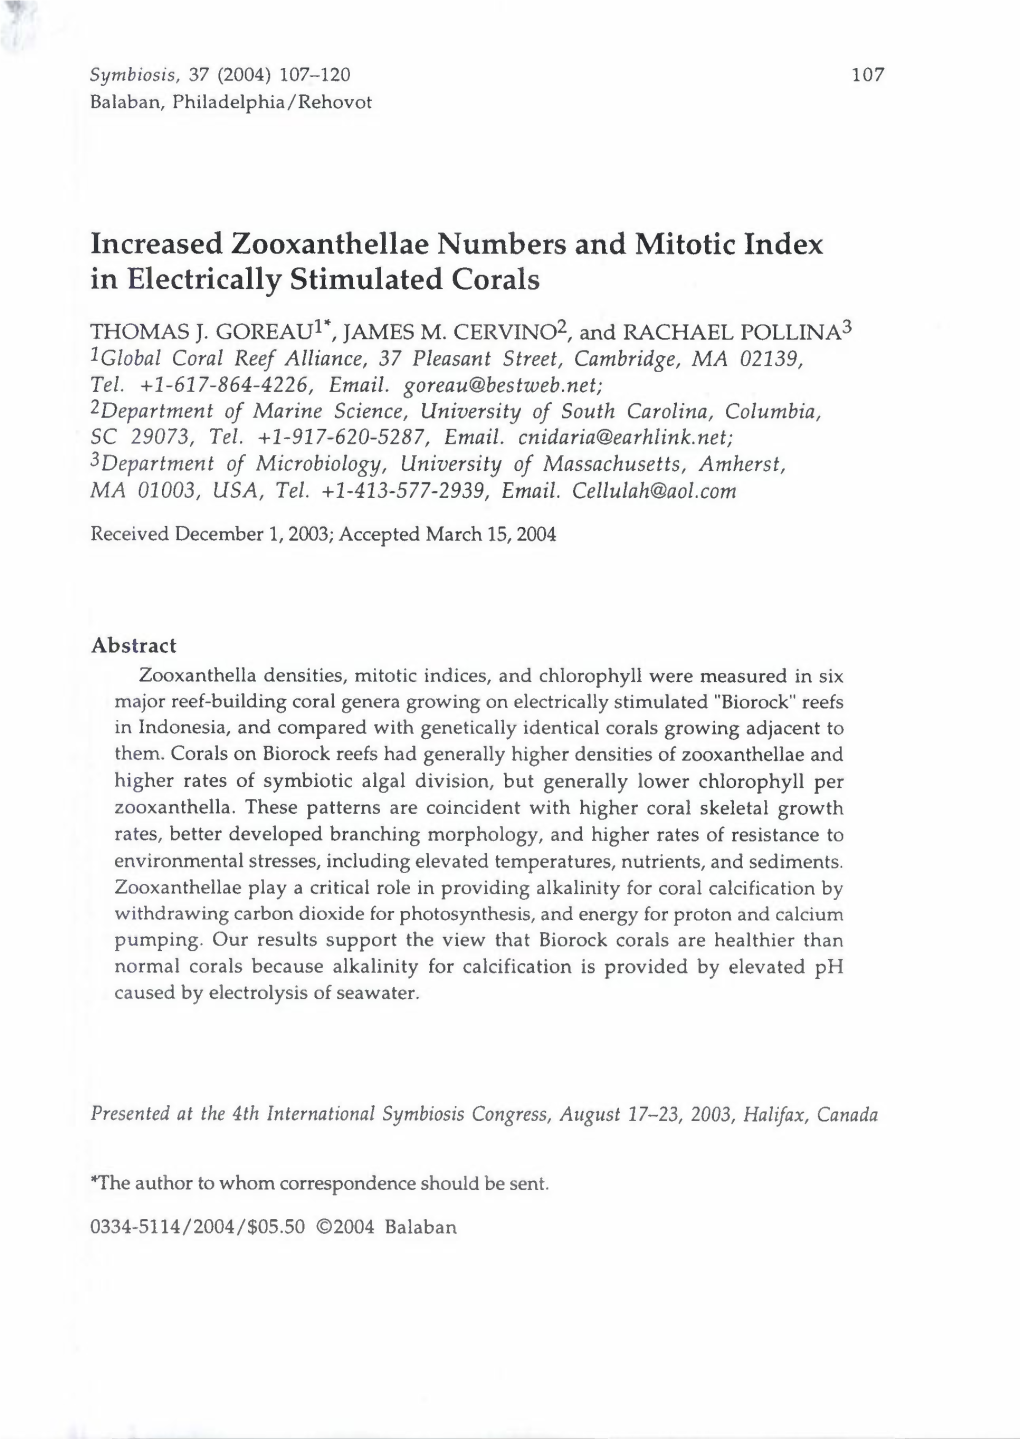 Increased Zooxanthellae Numbers and Mitotic Index in Electrically Stimulated Corals